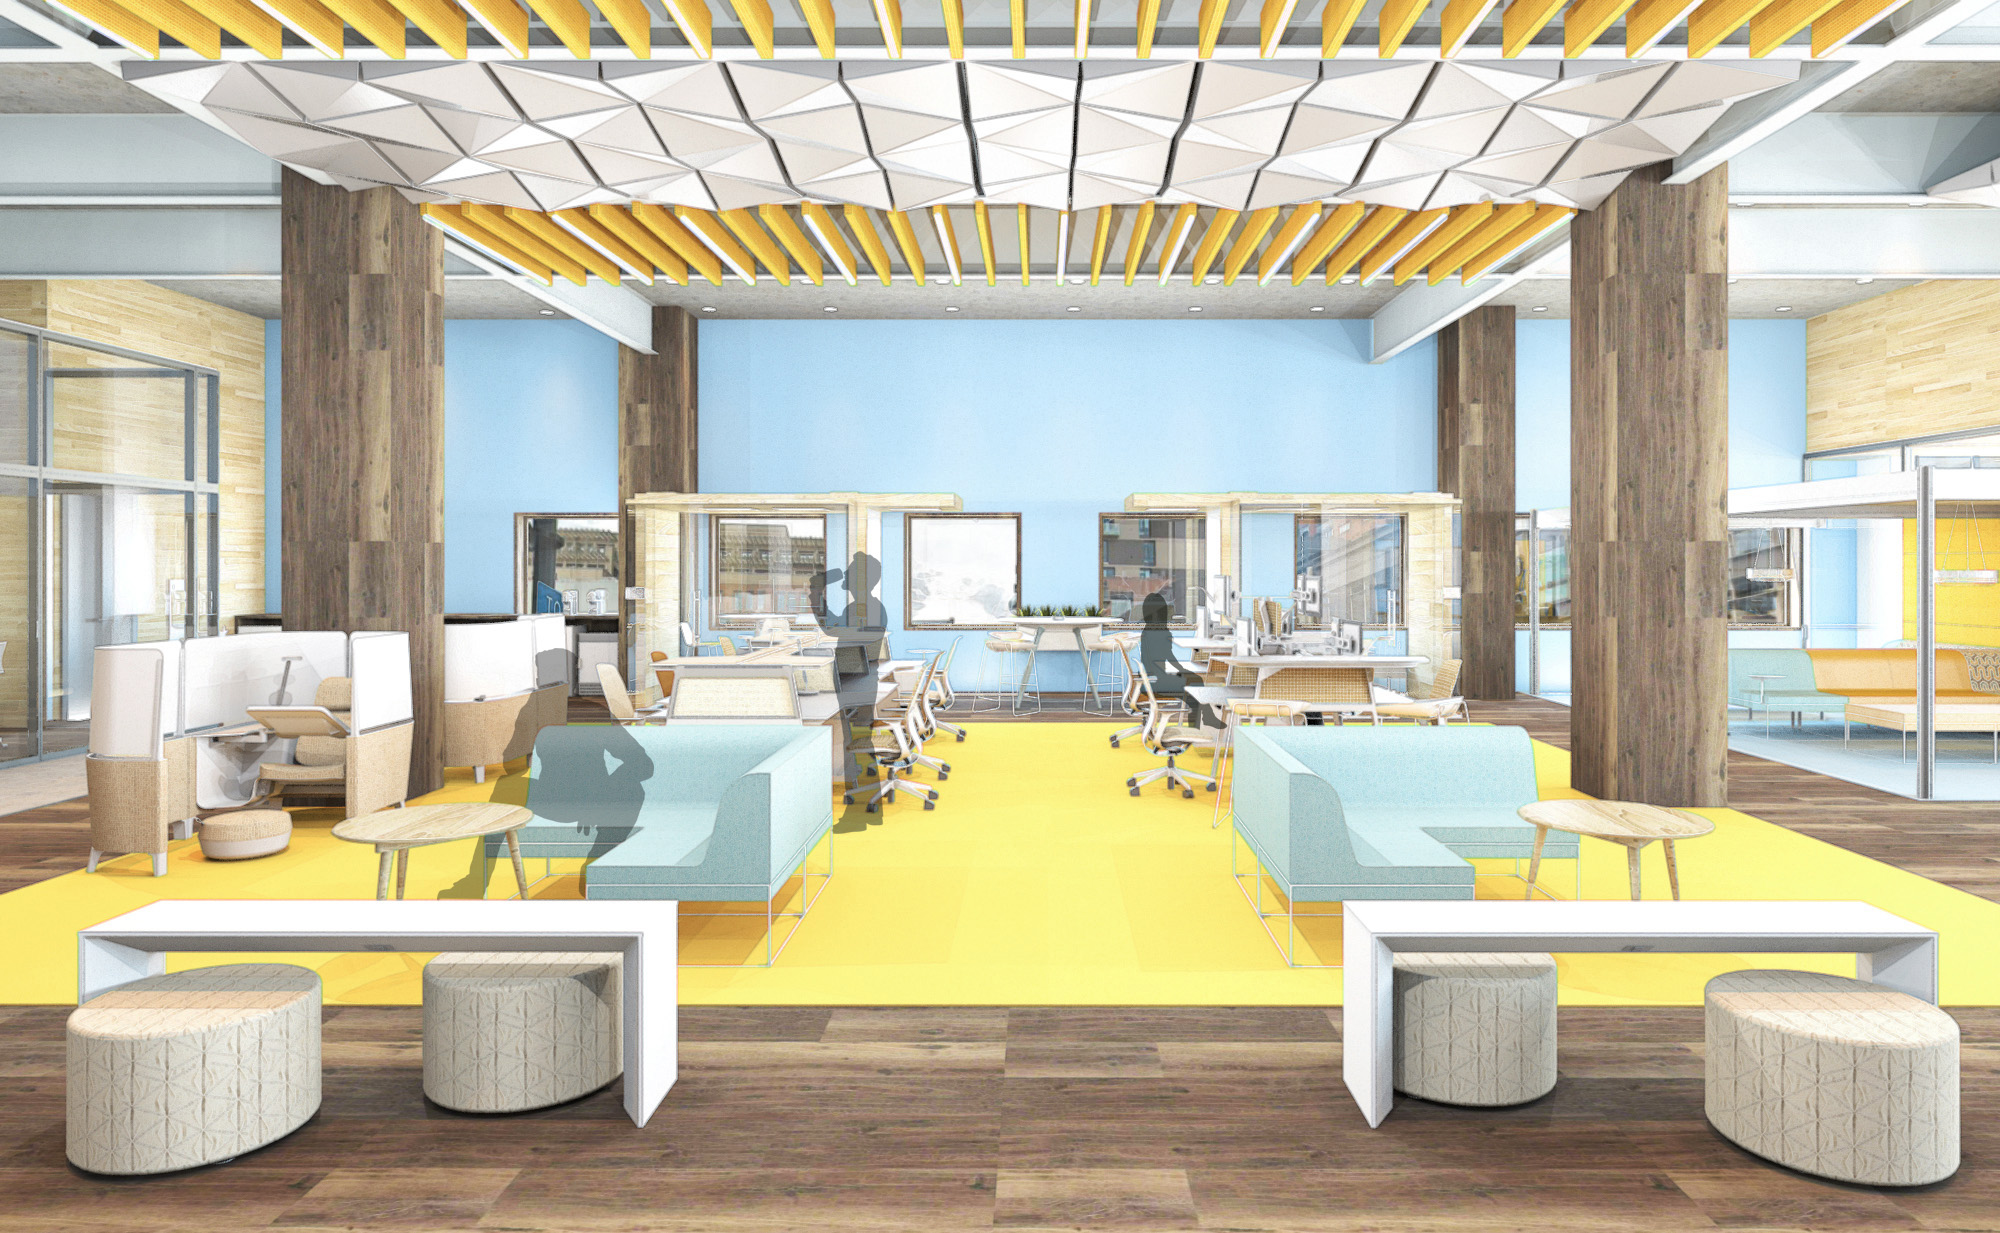 ISU interior design projects win top 10 recognition in Steelcase NEXT